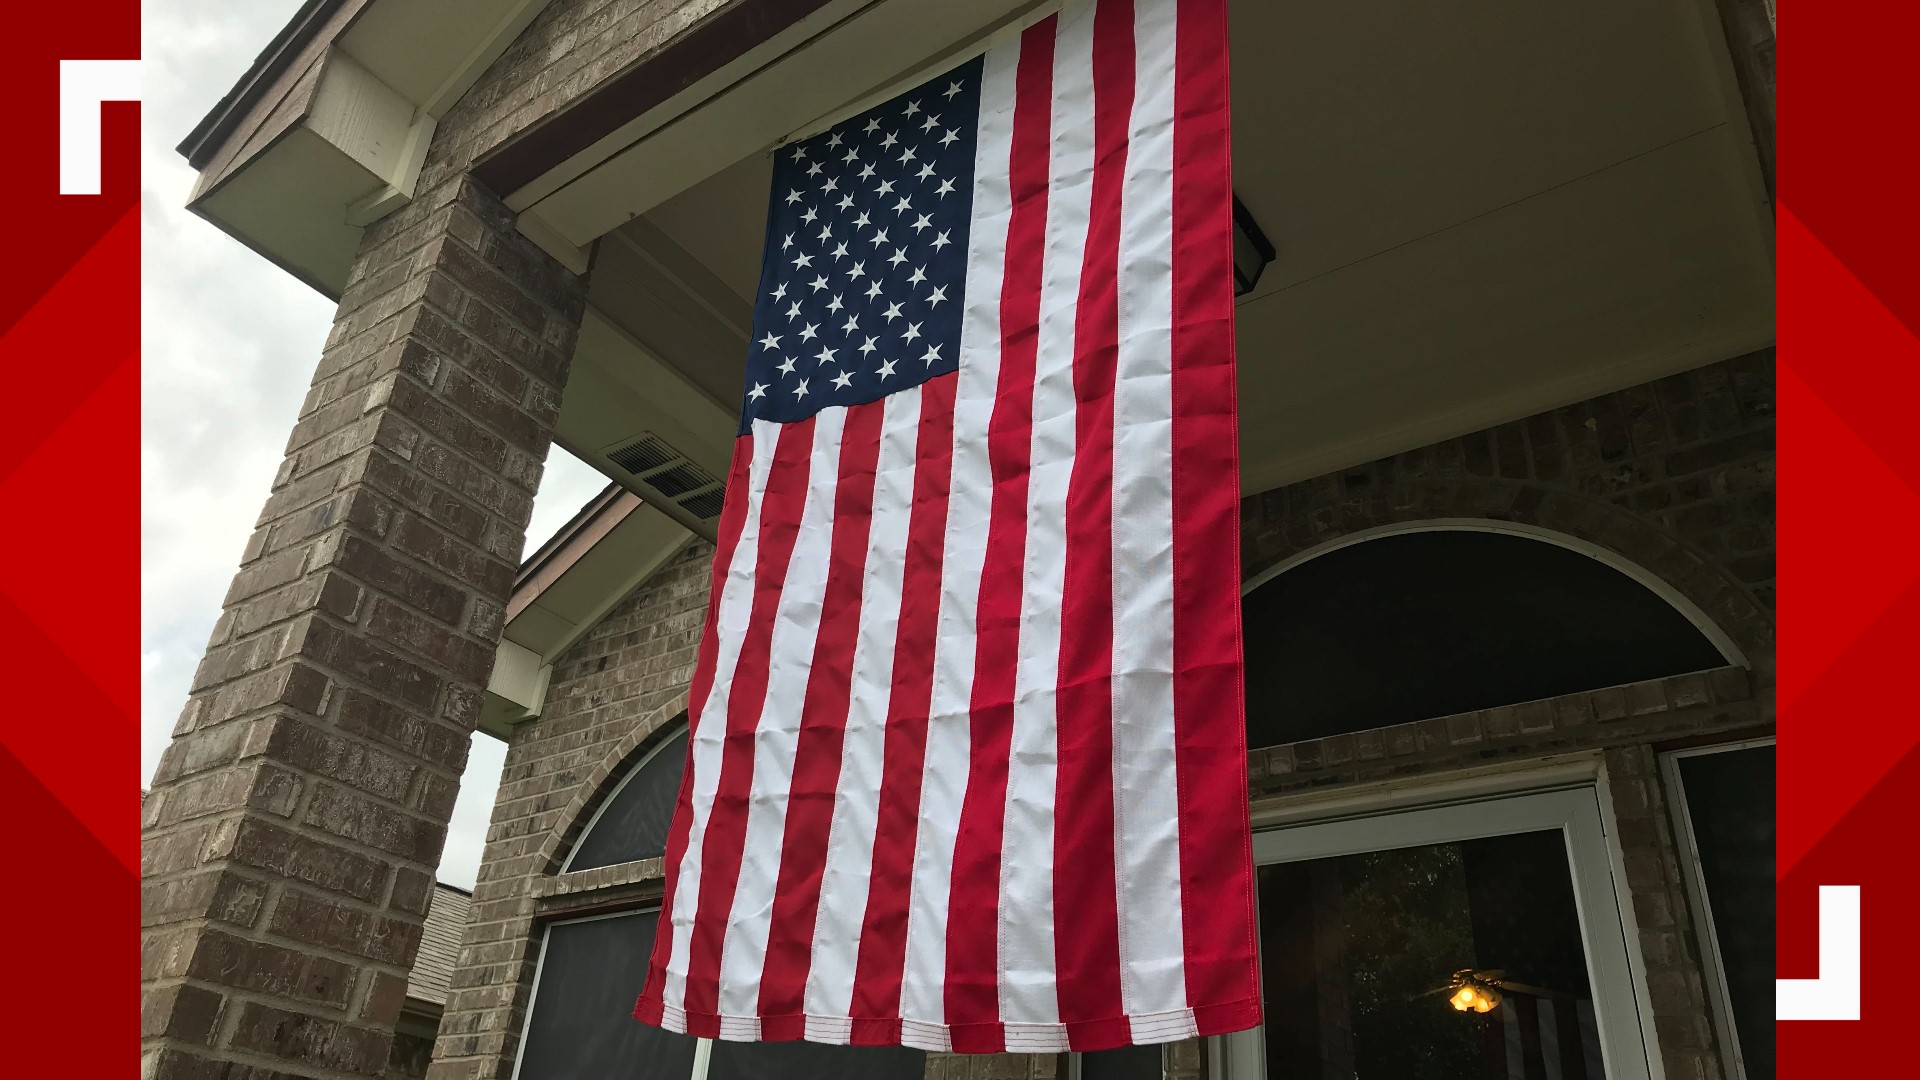 A Fort Hood soldier is fighting his local HOA and property management company for his right to fly the American flag.